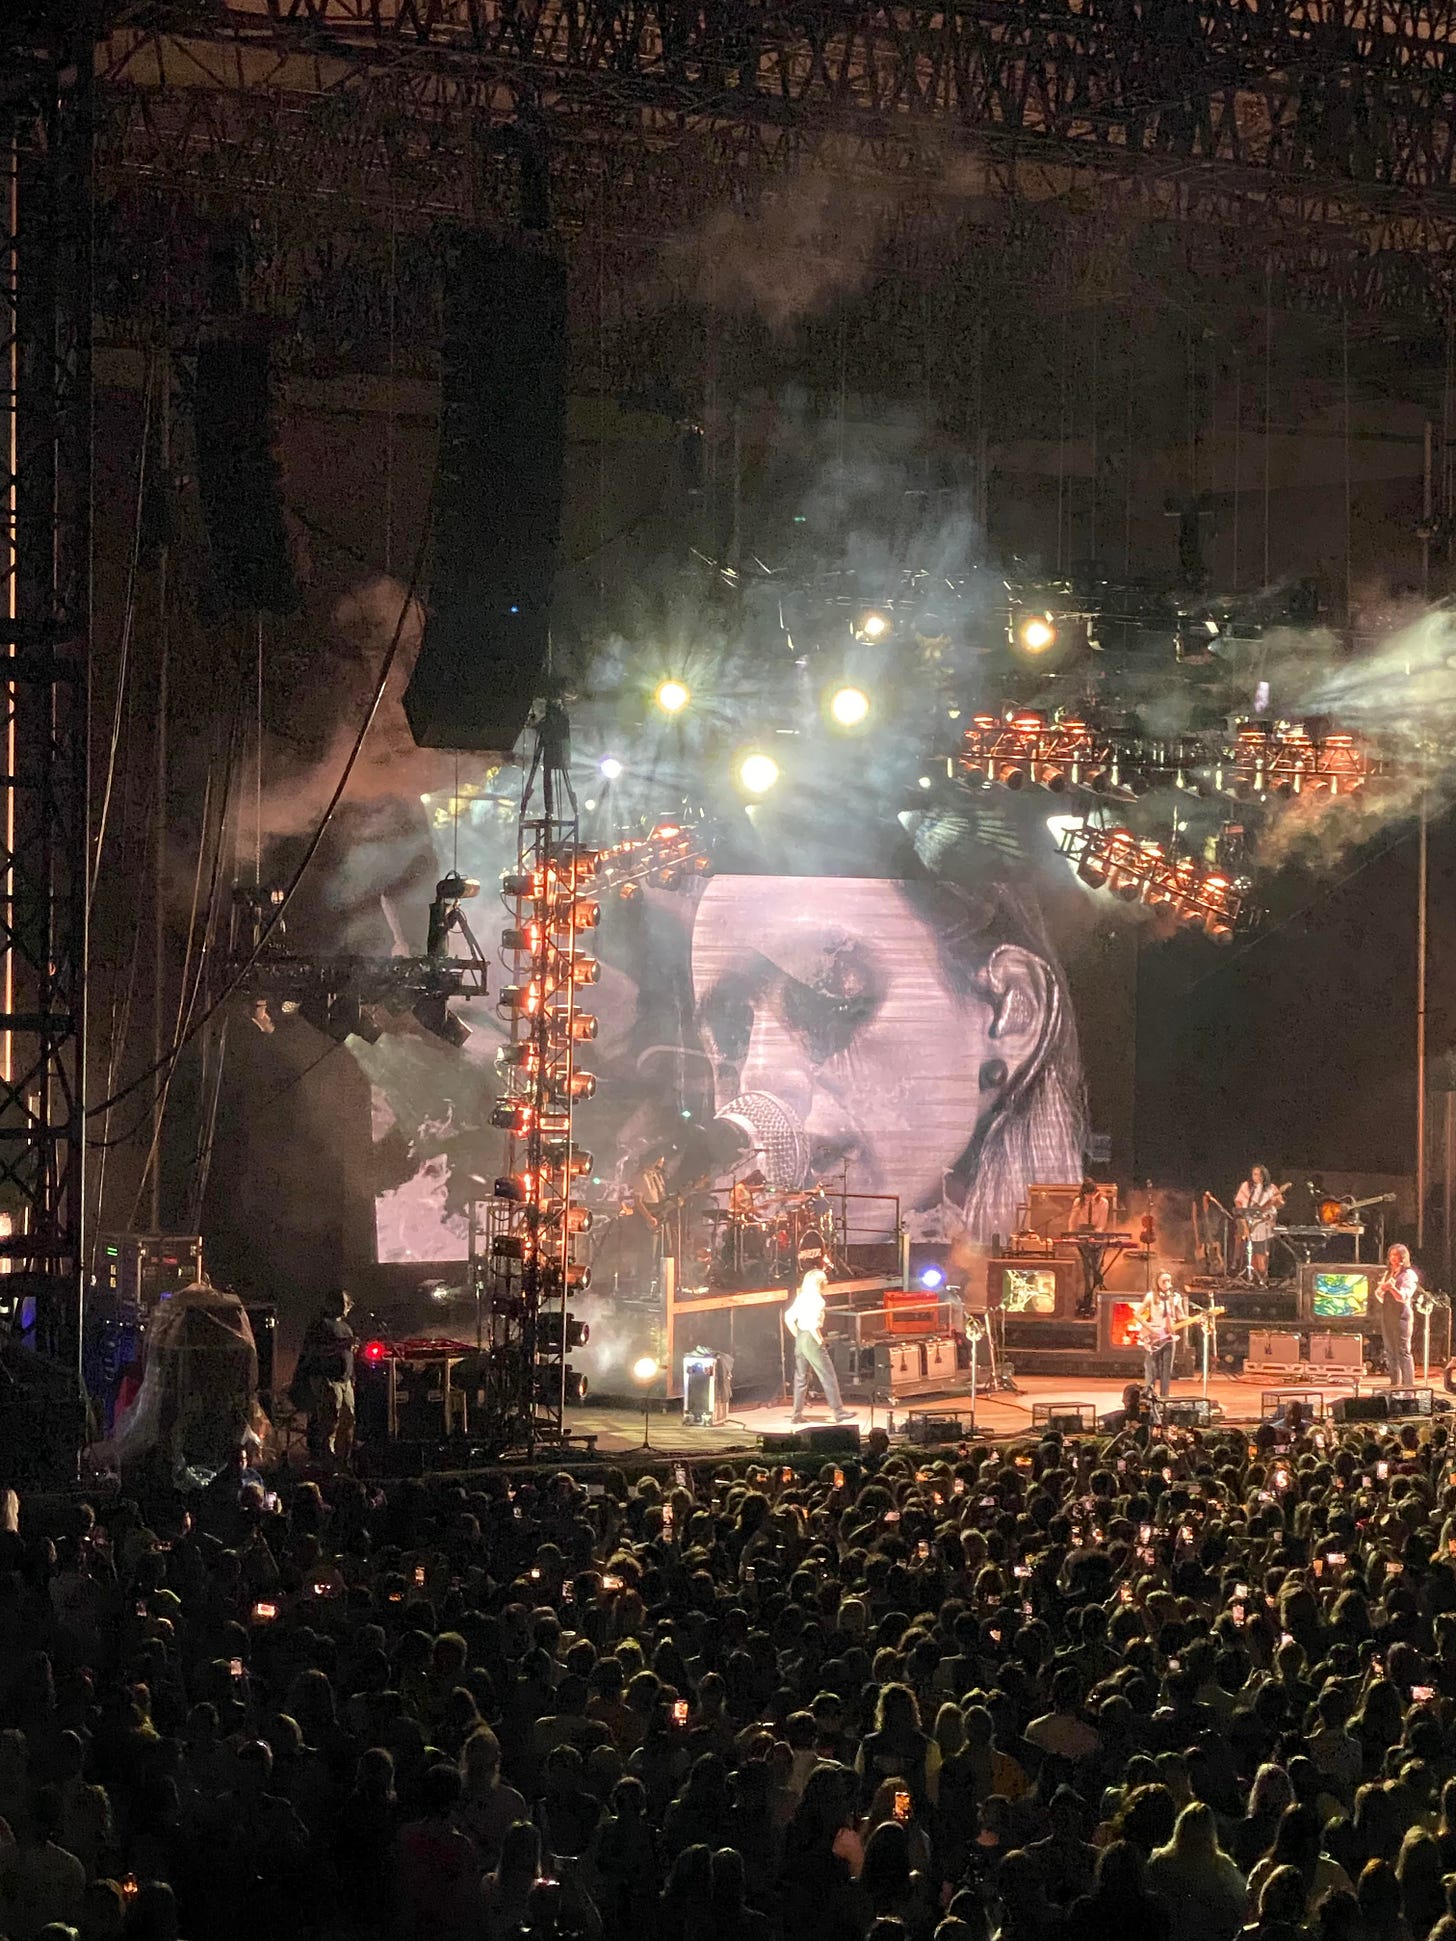 Sarah's photo of boygenius at Forest Hills Stadium, with a close up of Julien on screen